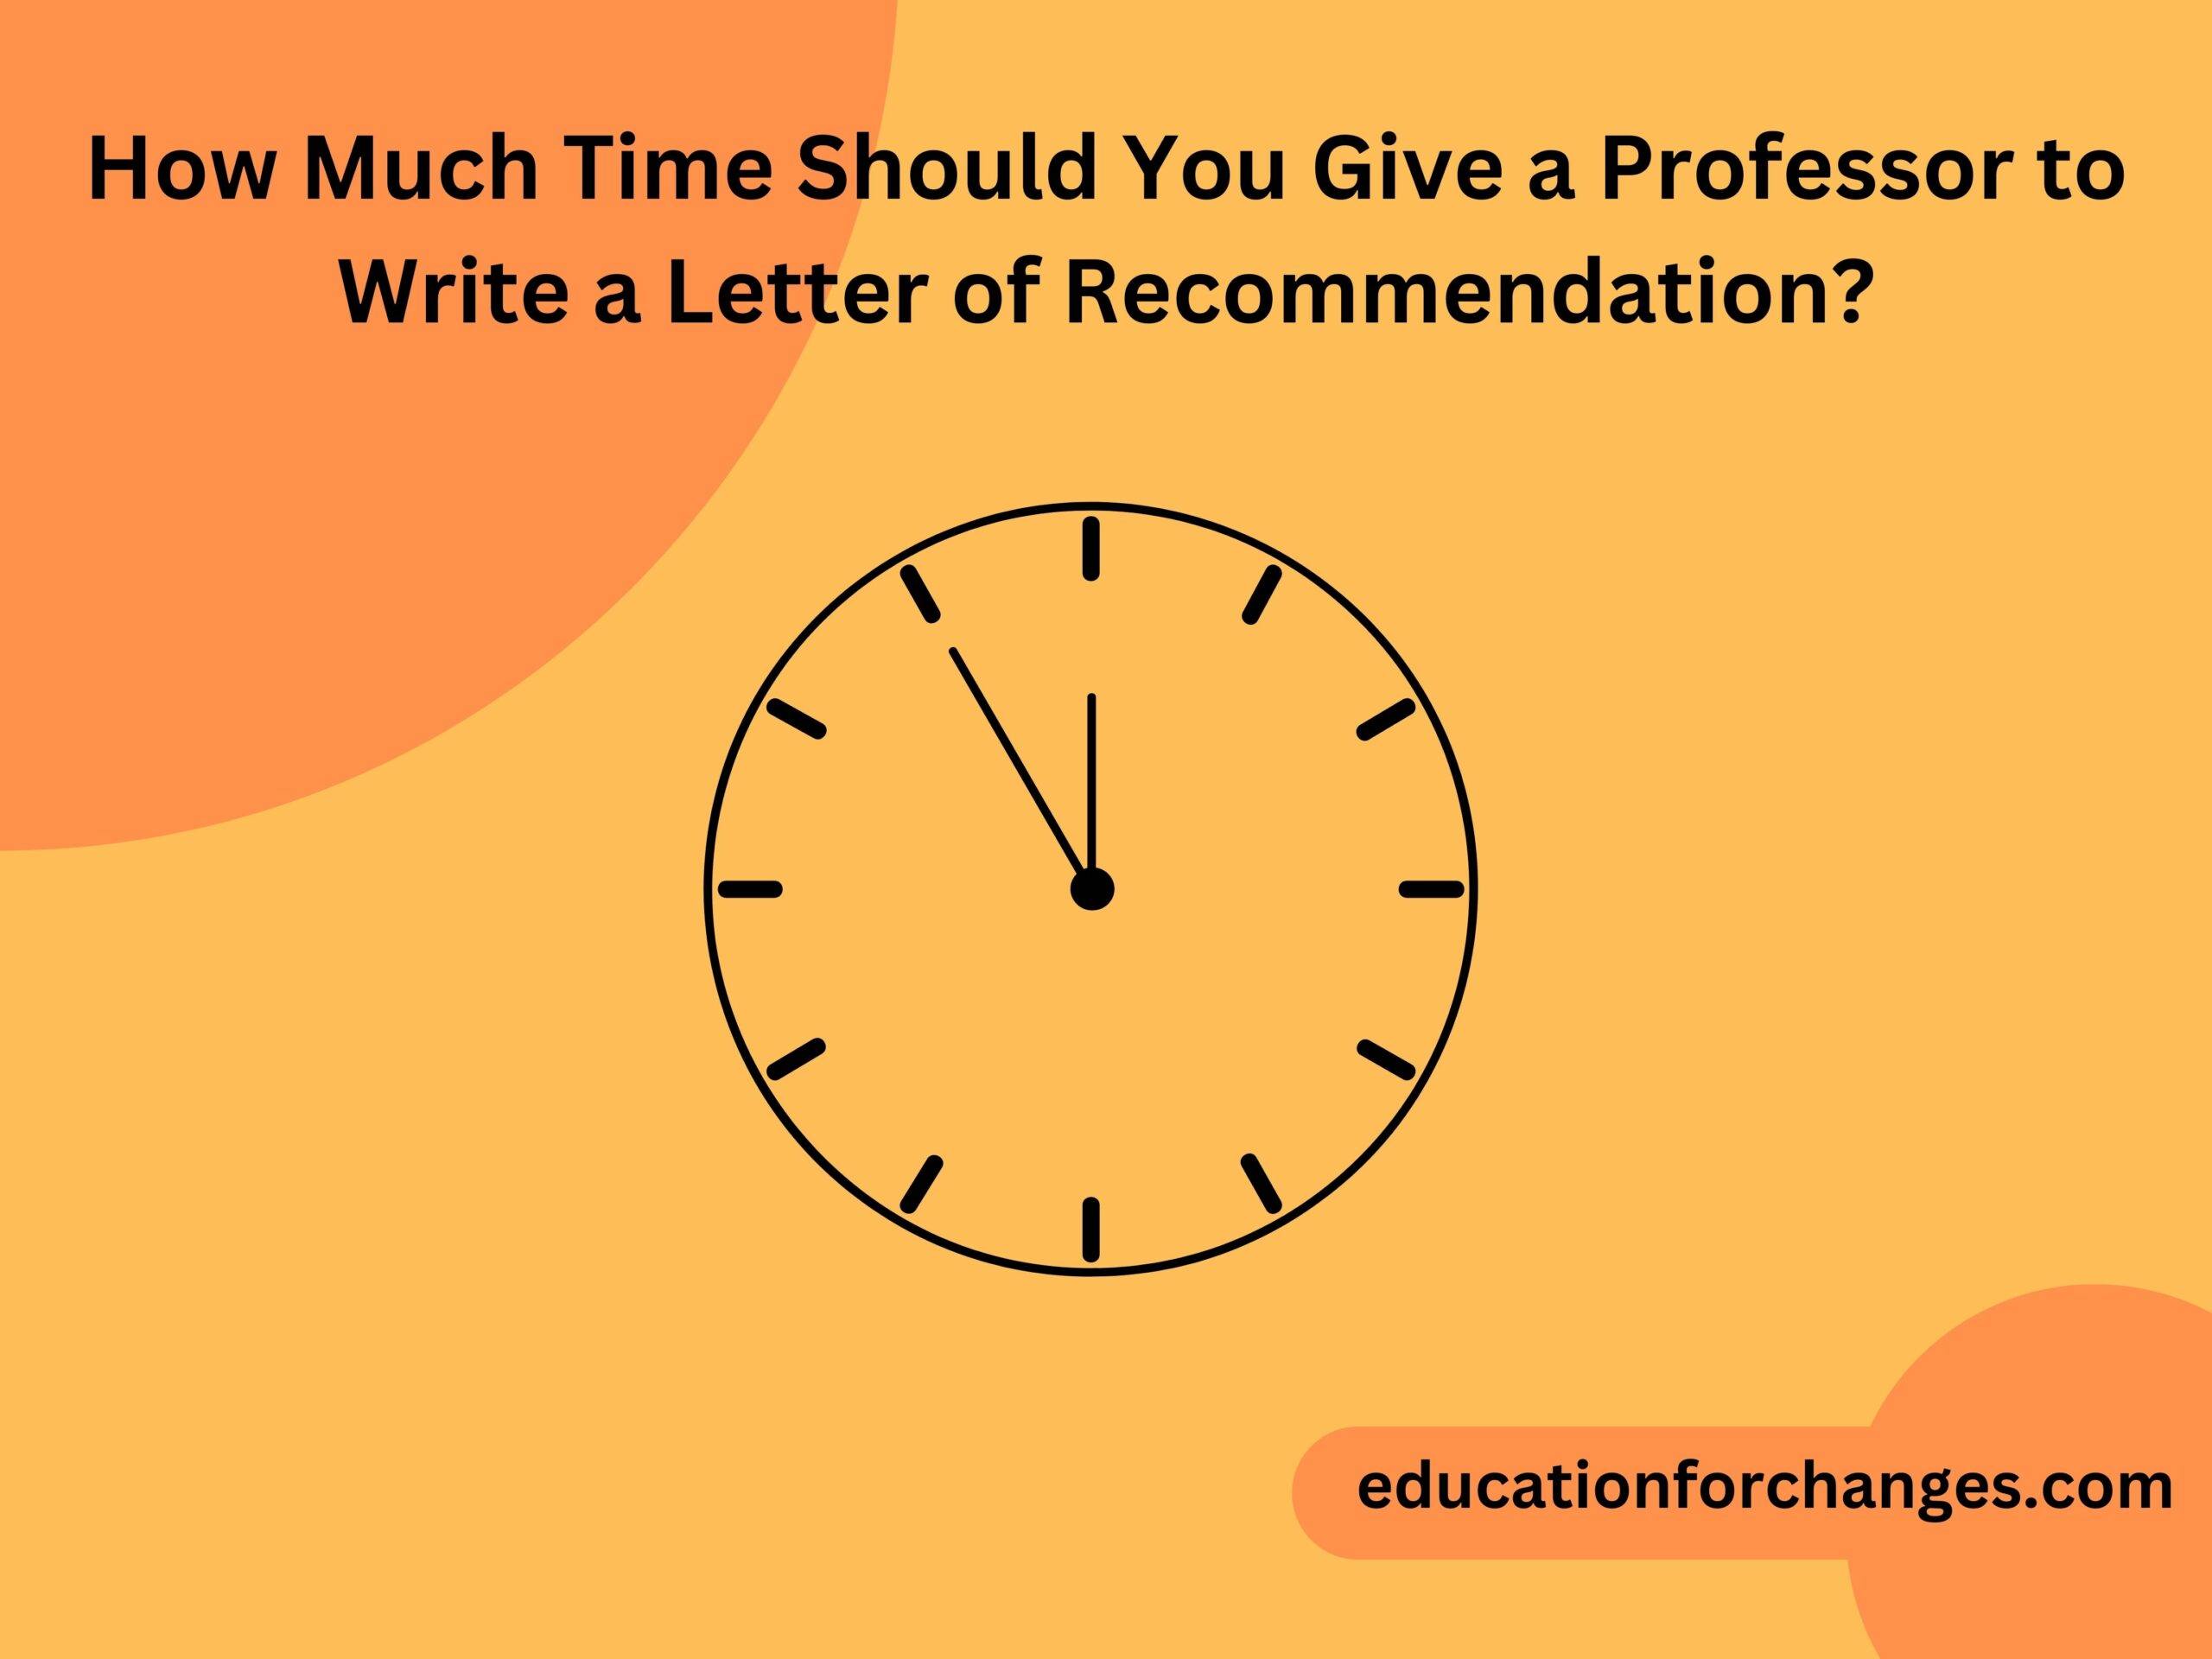 How Much Time Should You Give a Professor to Write a Letter of Recommendation?